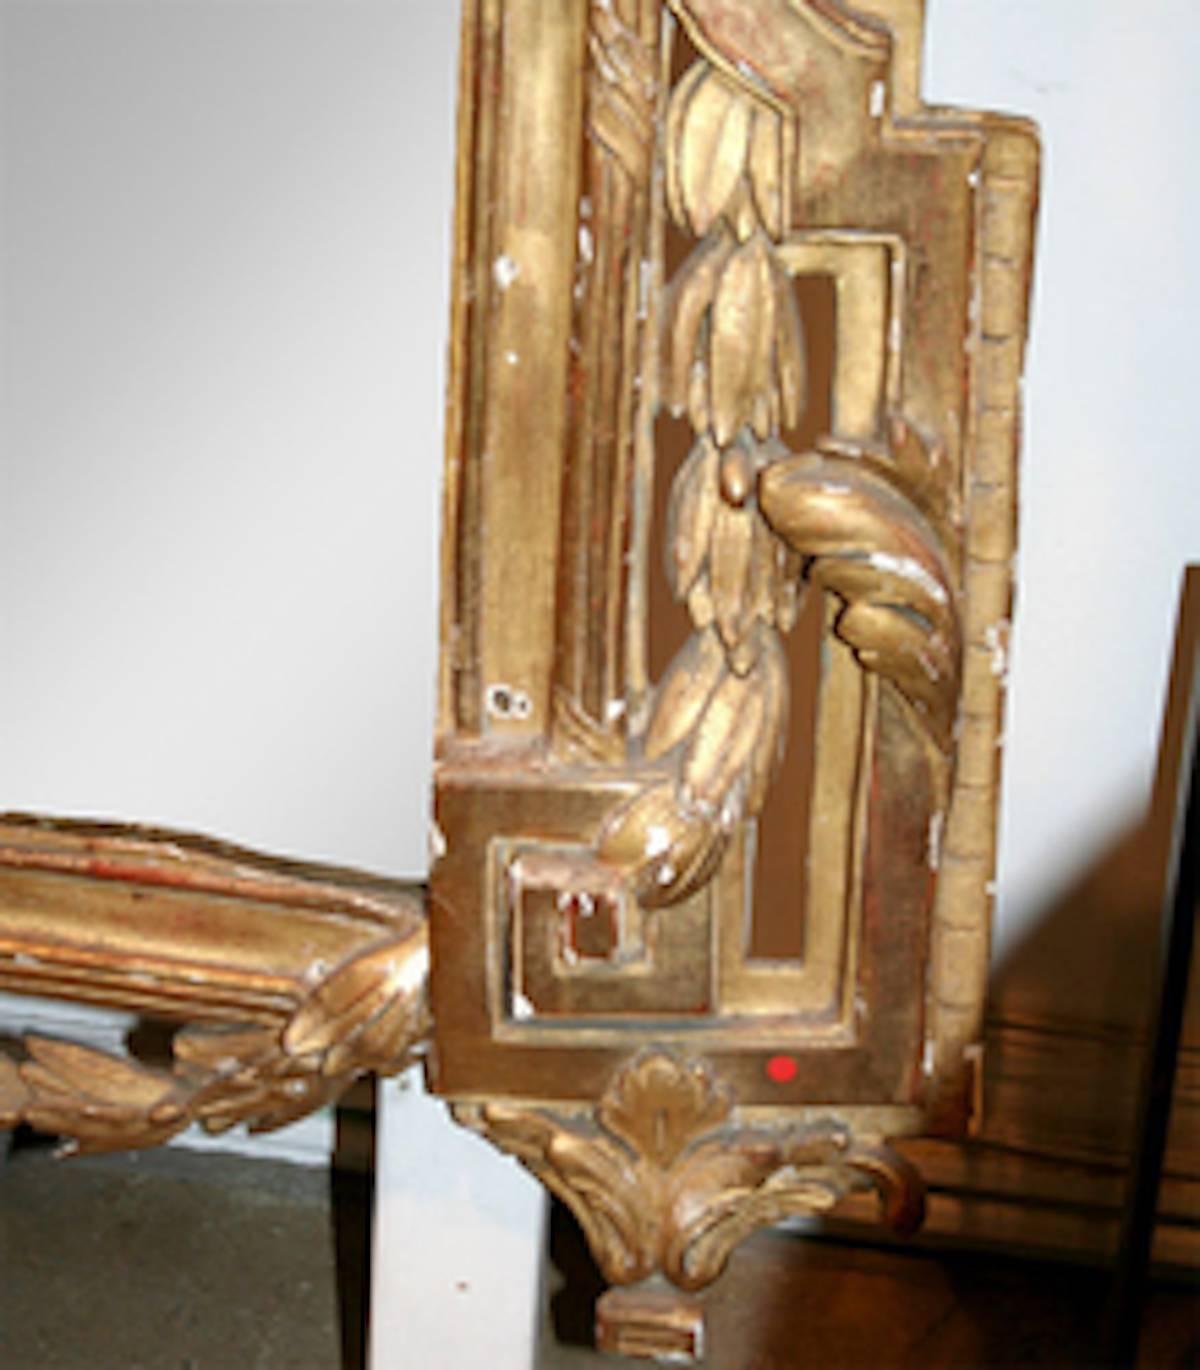 An 18th century Louis XVI wall or mantel mirror with original glass and a frame of wood, gesso and gilt, with grand floral reliefs. Some restoration of gilt and gesso may be desirable. Requires professional shipping and installation.